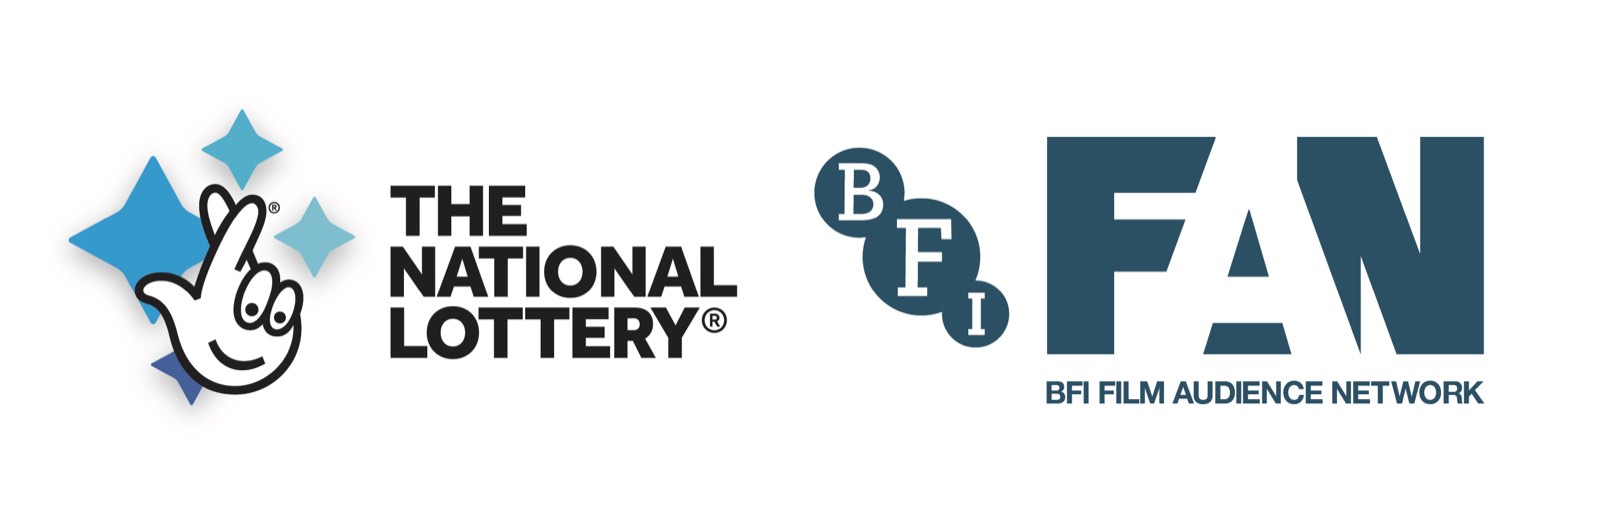 National Lottery and BFI FAN logos